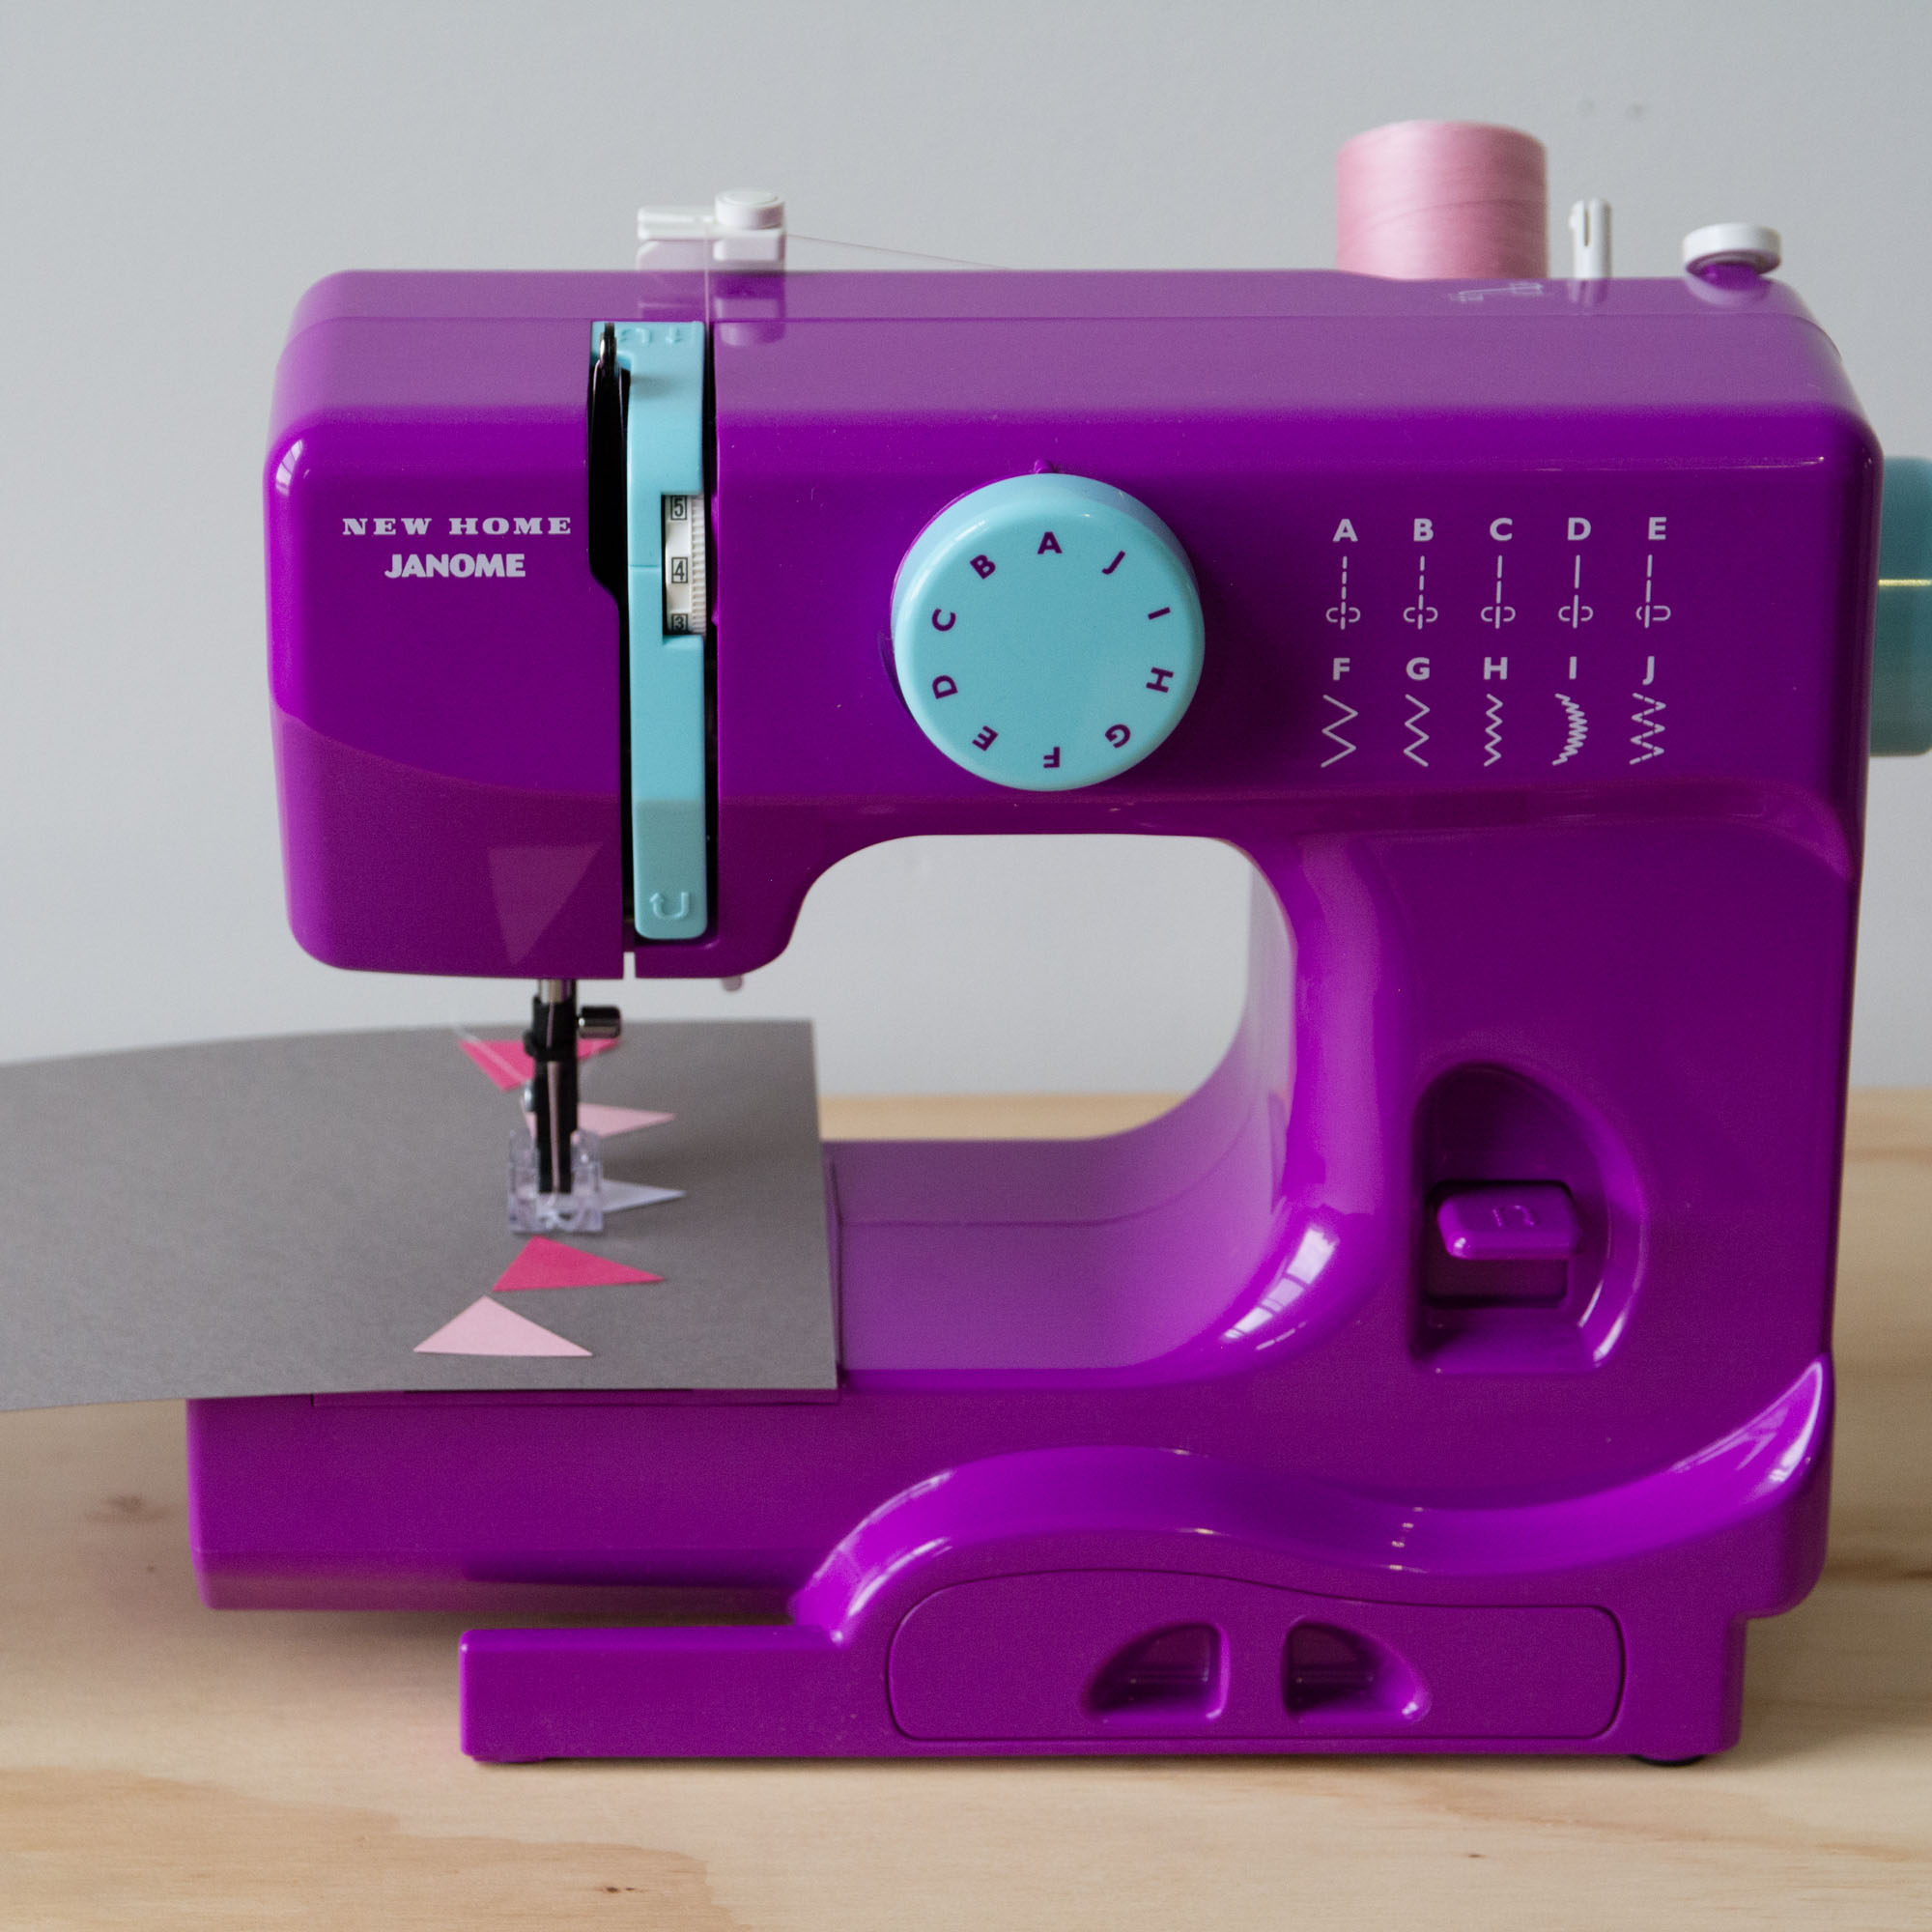 Janome Basic 10-Stitch Portable Sewing Machine with Top Drop-In Bobbin, 4-Piece Feed Dog and Accessory Storage, Purple Thunder - image 2 of 10